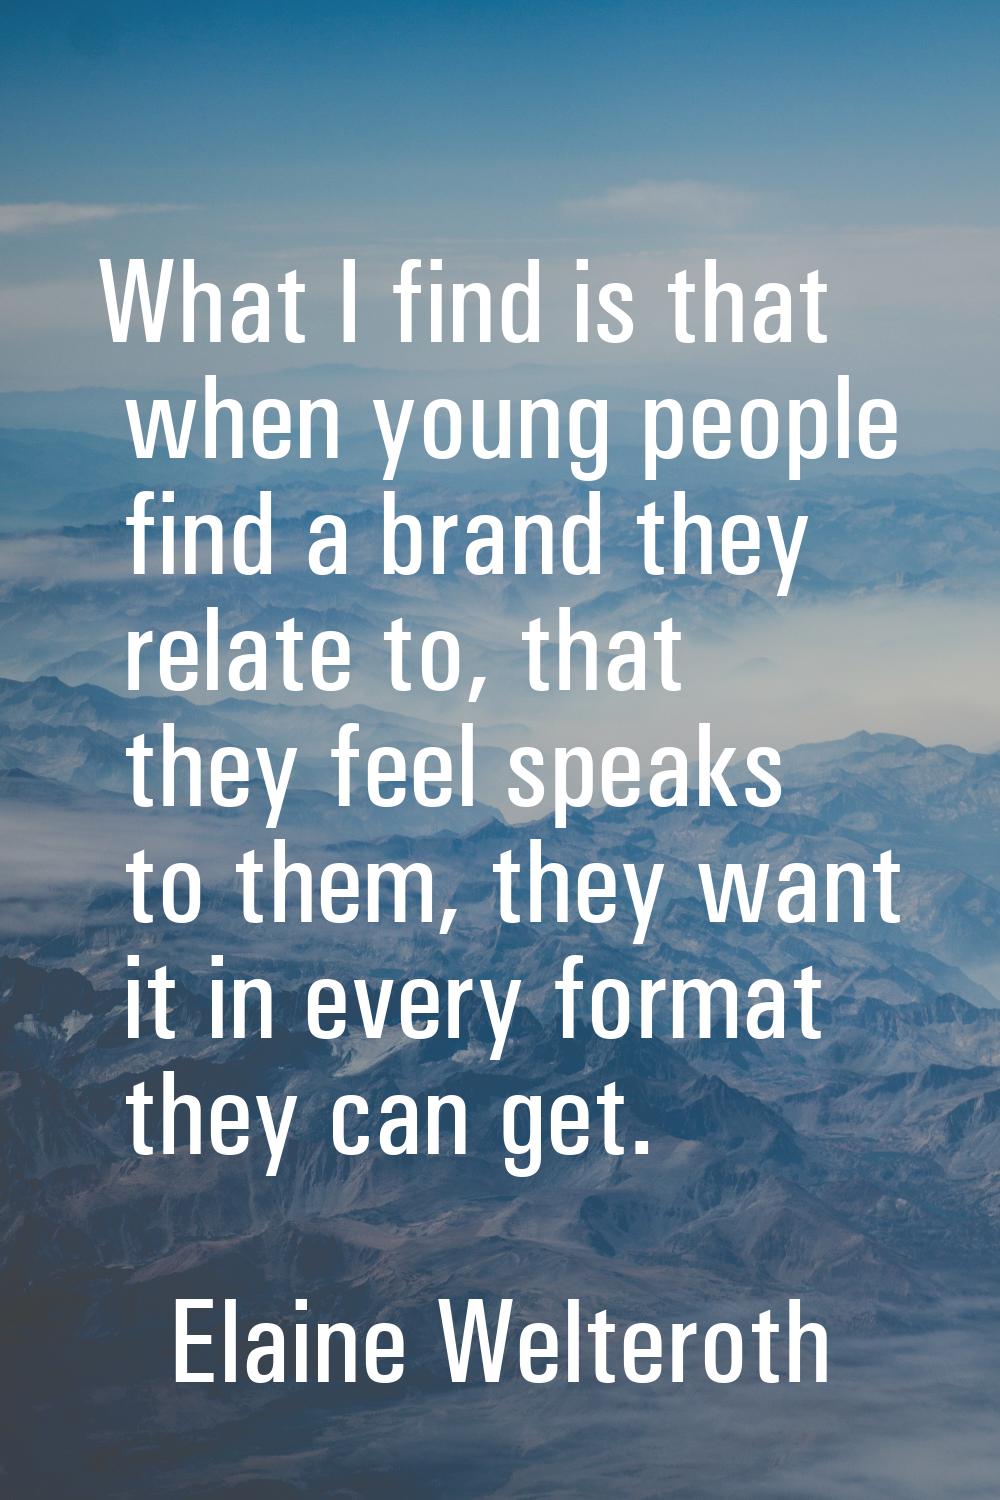 What I find is that when young people find a brand they relate to, that they feel speaks to them, t